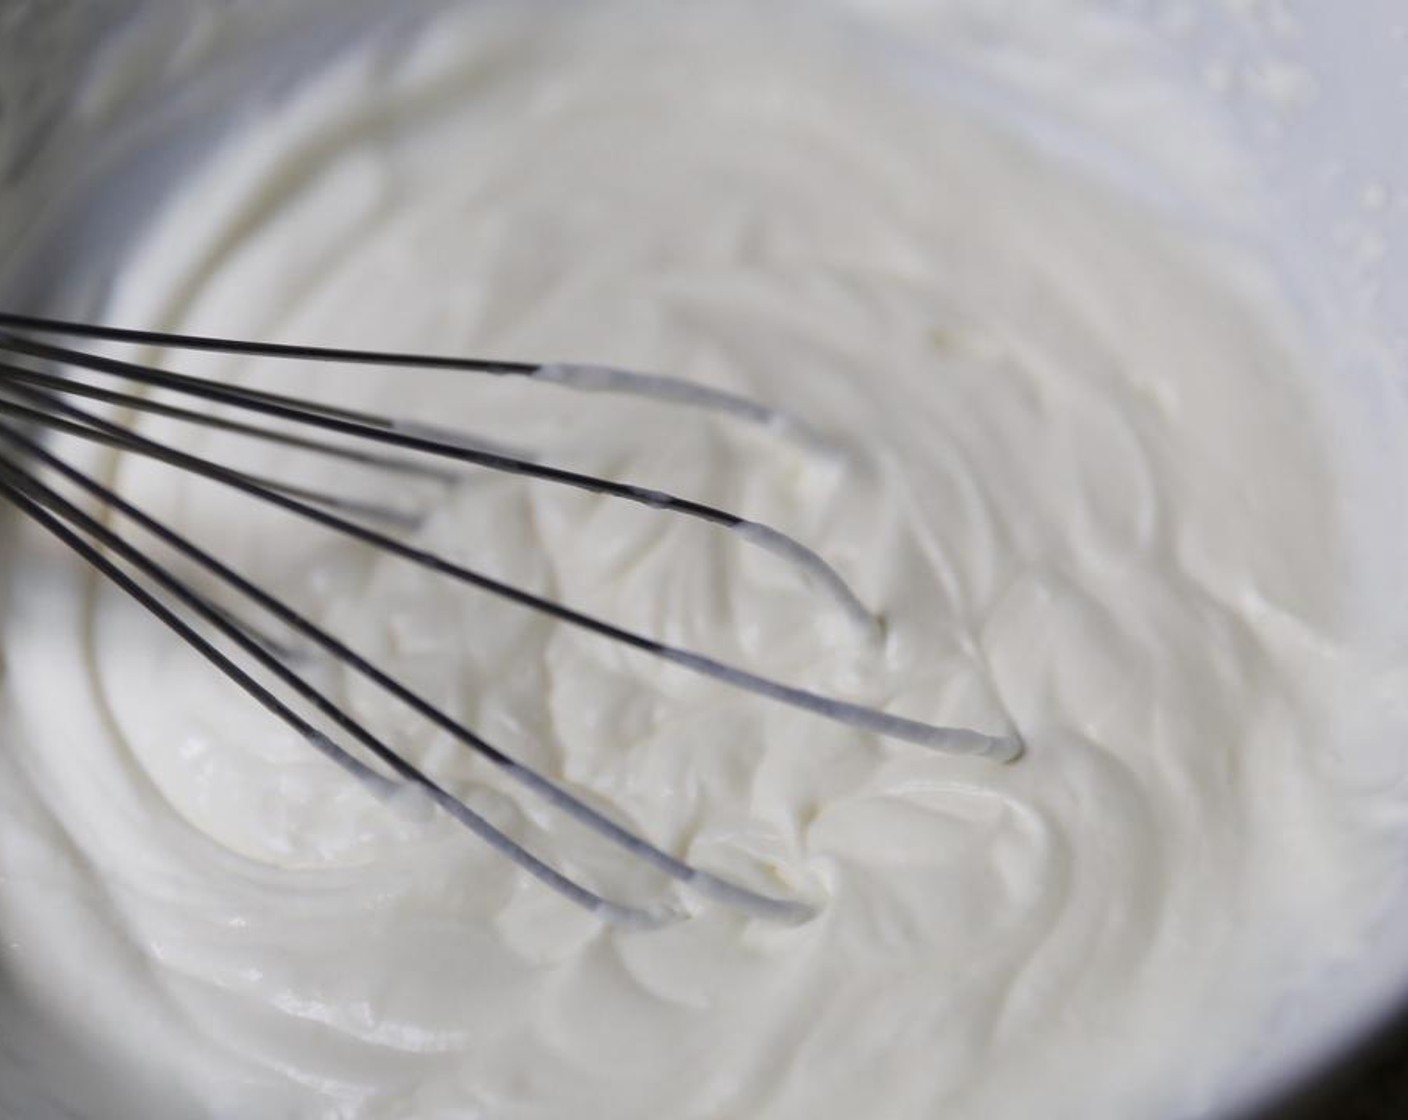 step 5 In another bowl, whisk the Cream (1 cup) until it forms soft peaks.